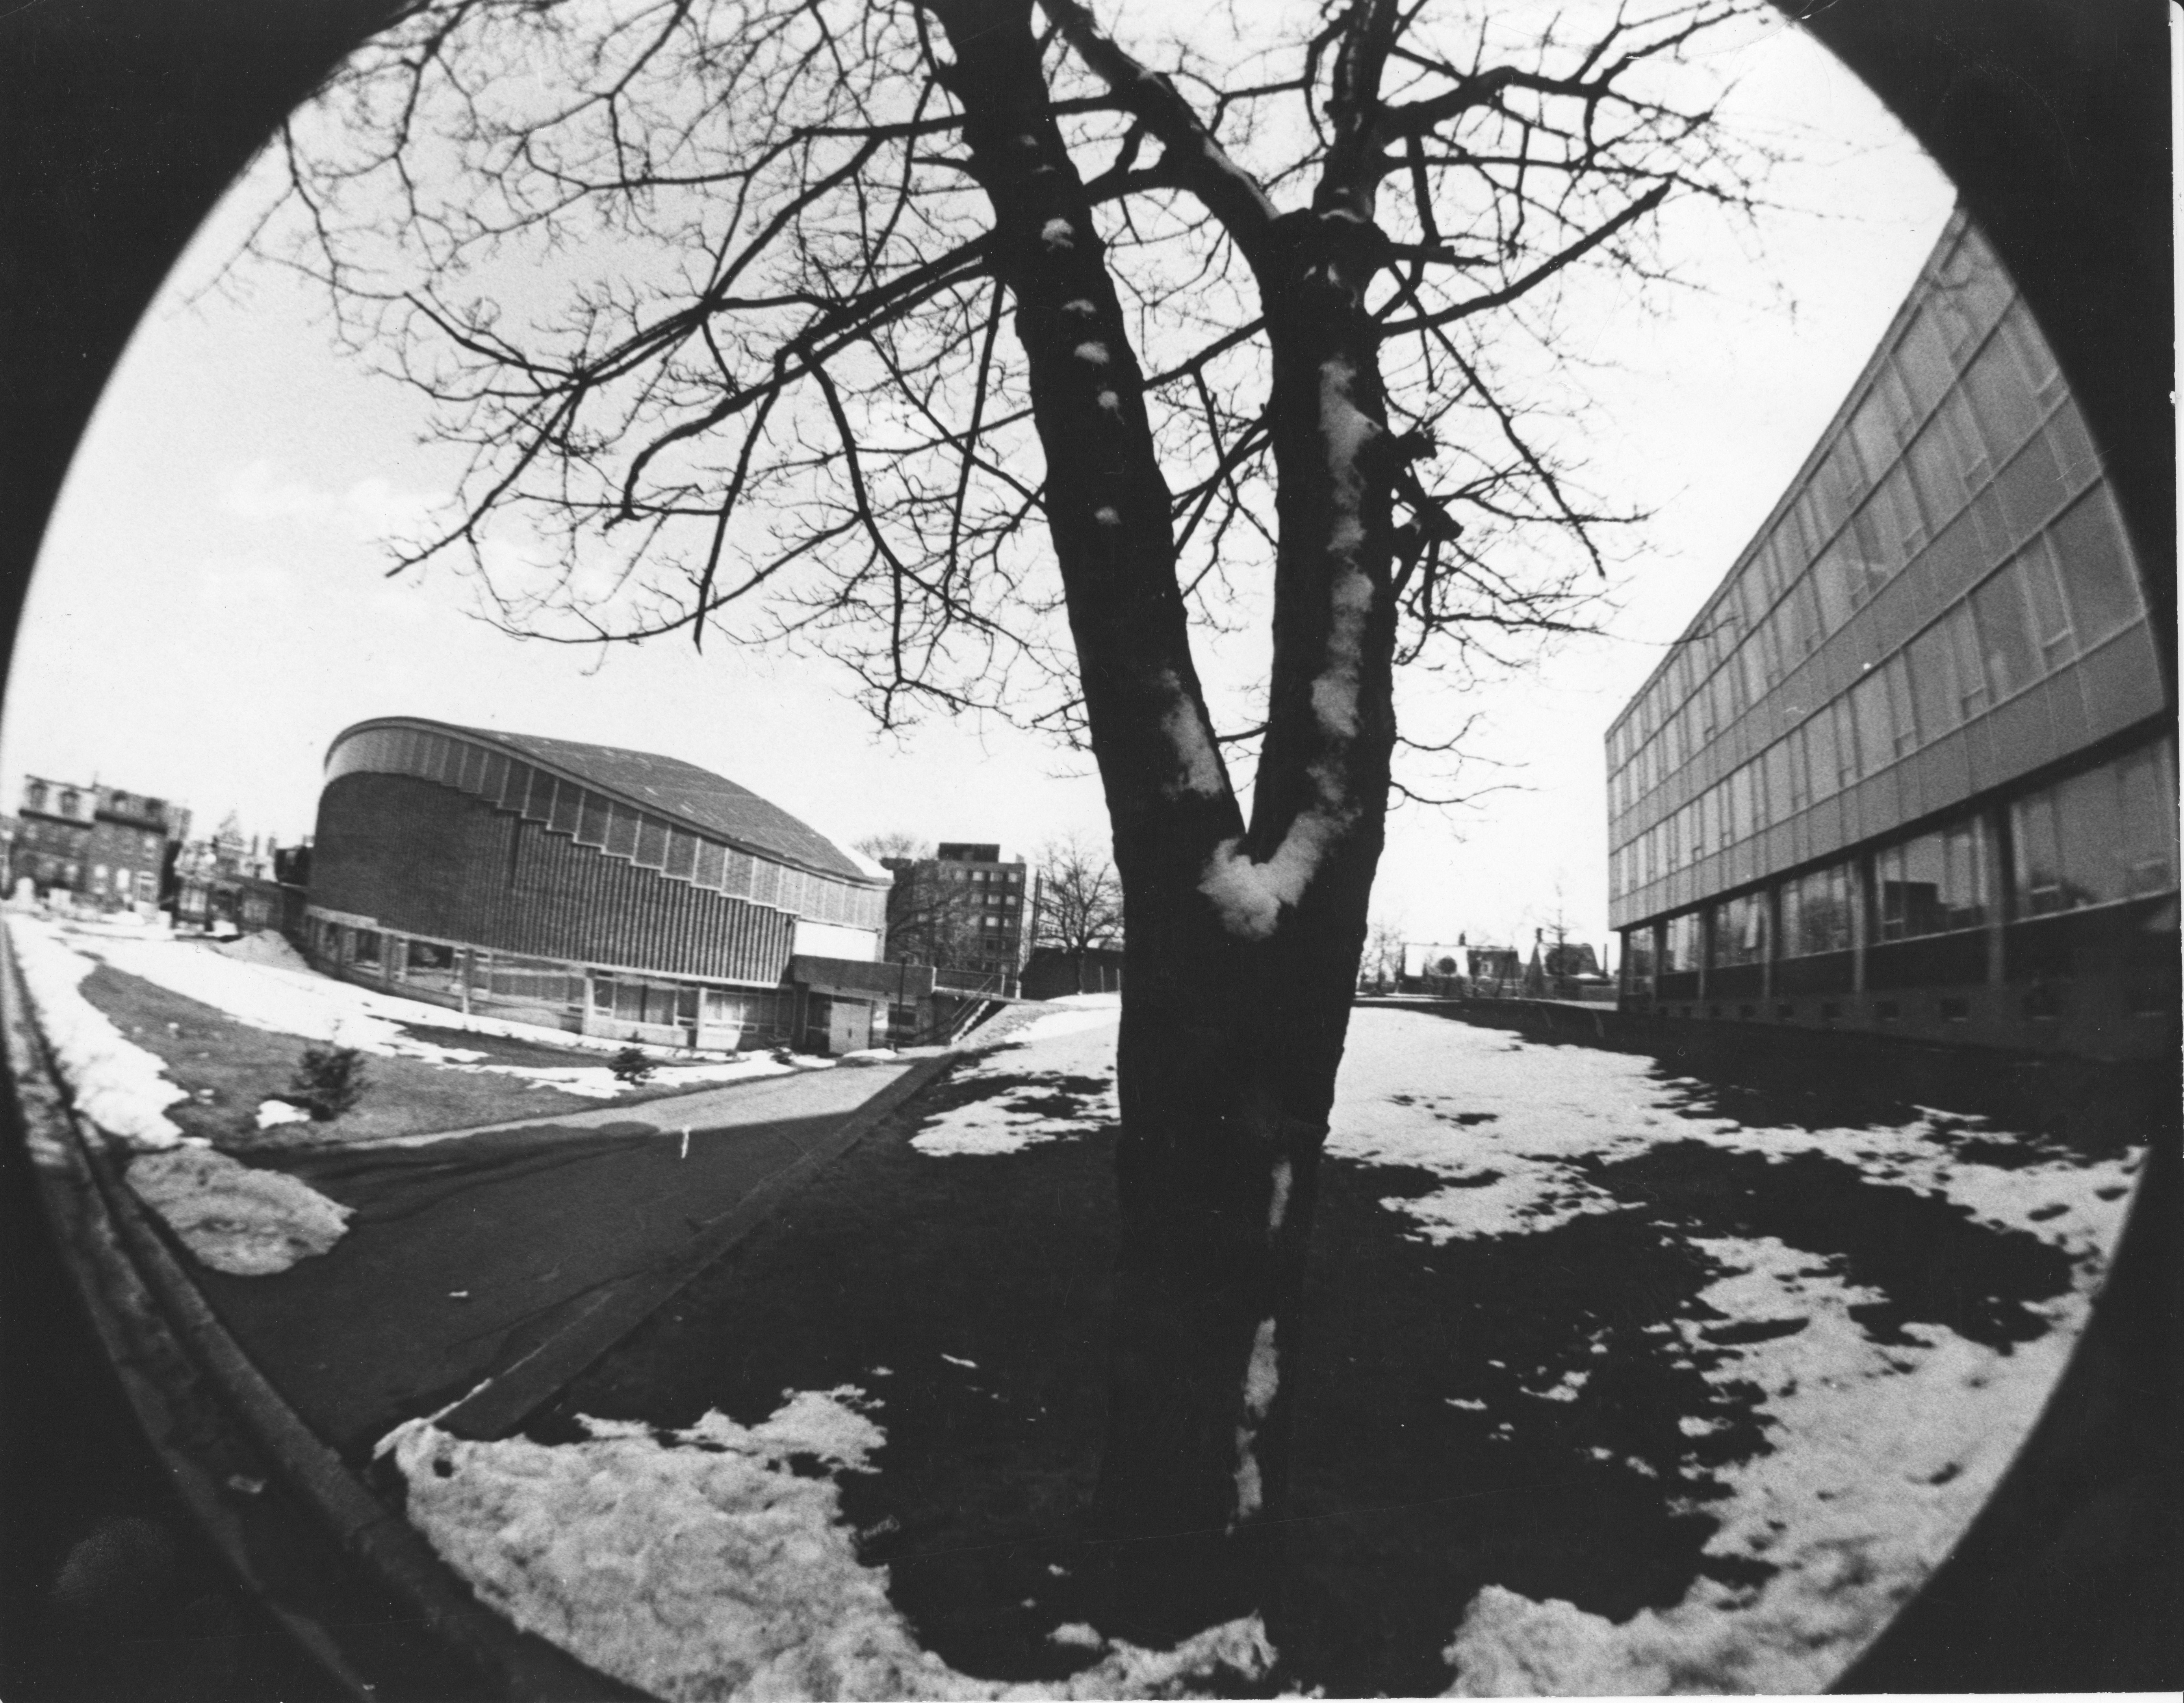 Fish Eye Photograph Of The F H Sexton Memorial Gymnasium And